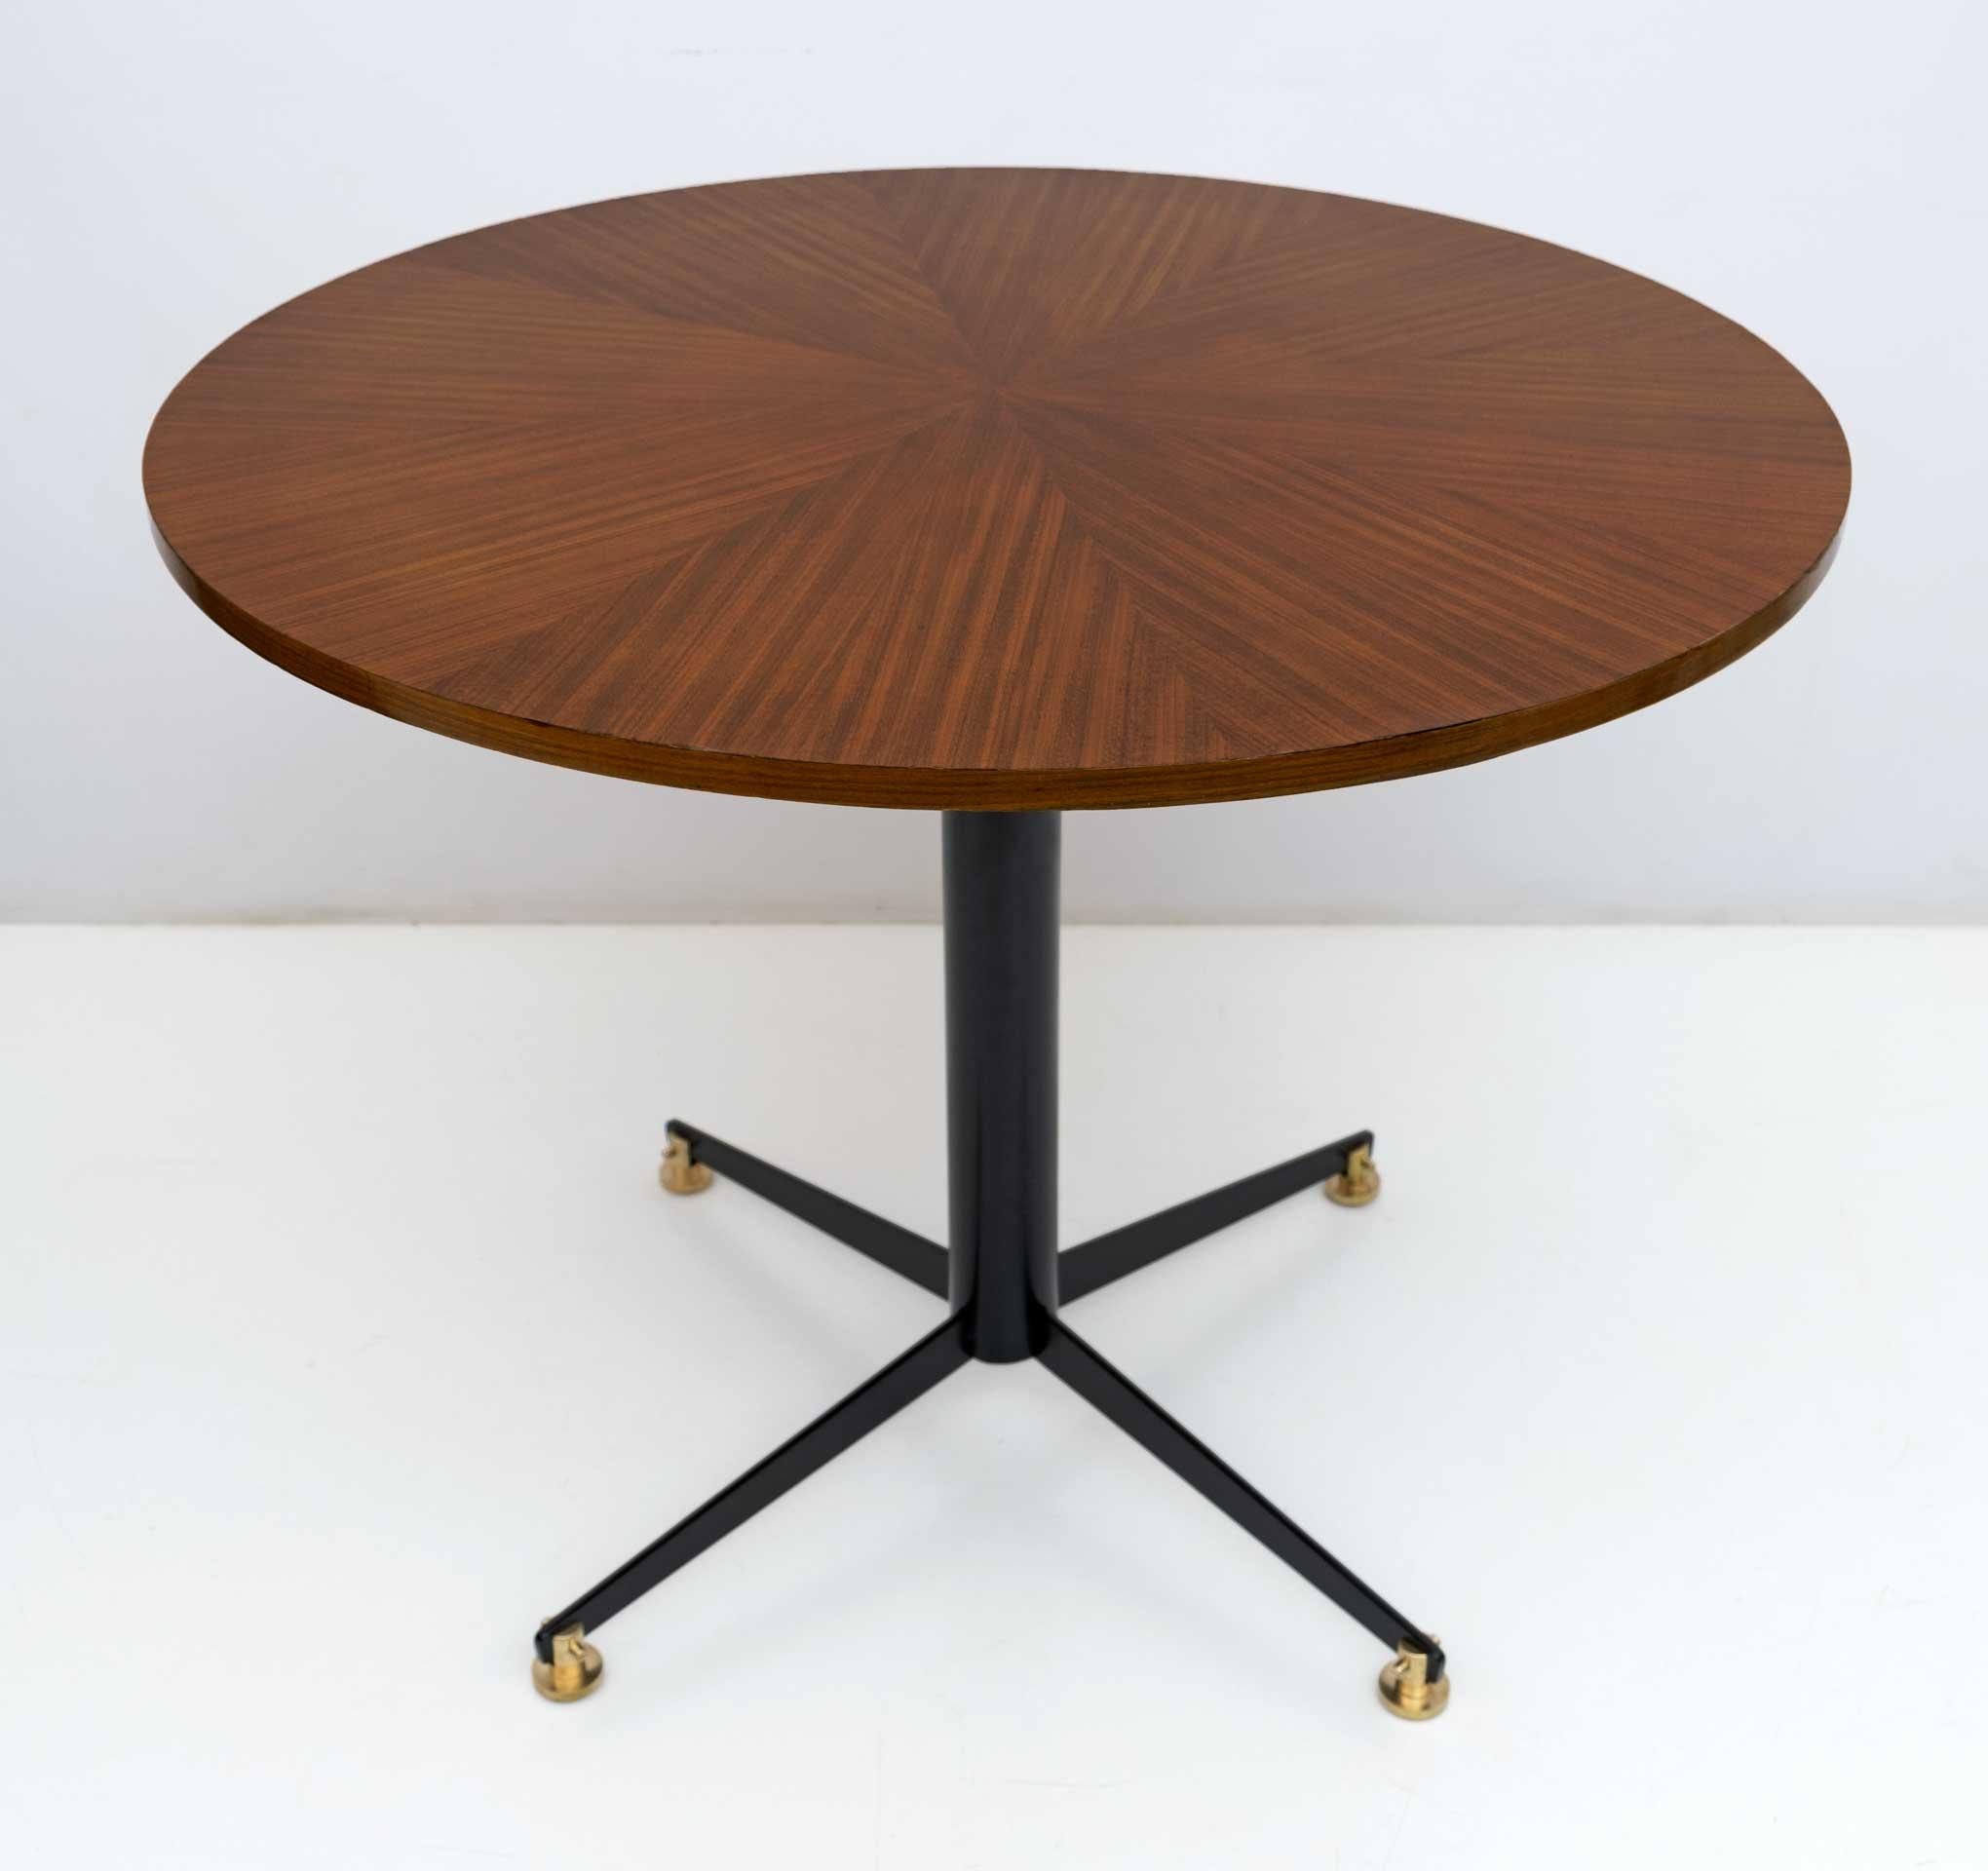 Table produced in the 1950s by Fratelli Tagliabue based on a design by Vittorio Nobili. Base in black painted metal and feet in brass, circular top in herringbone teak veneered wood. Completely restored and ready to decorate your home.